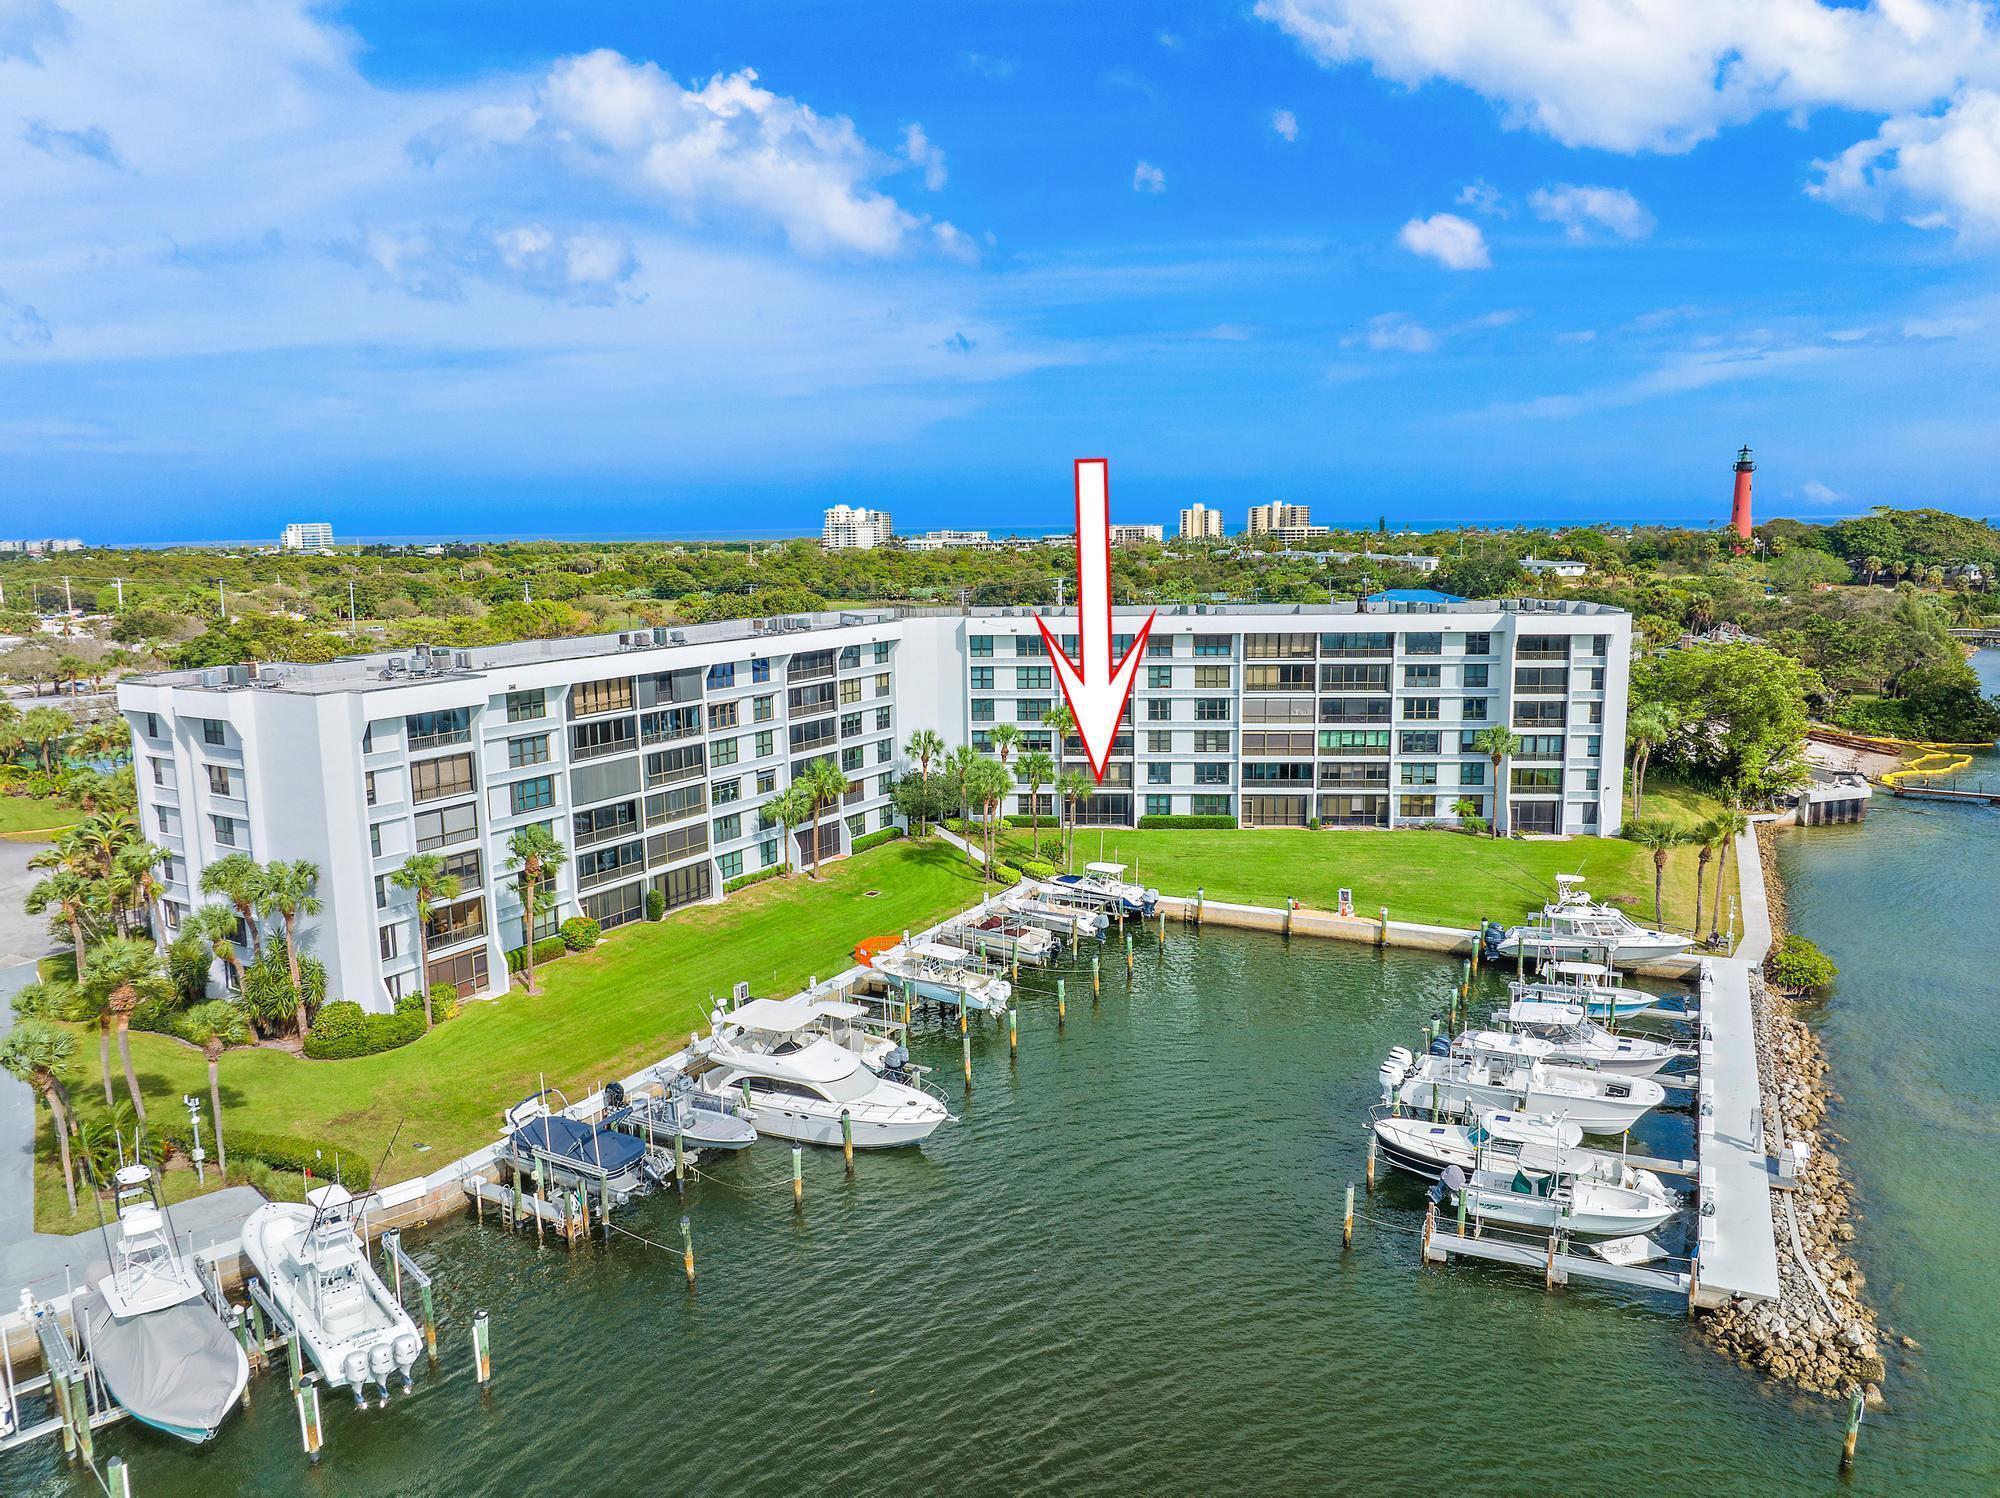 Enjoy amazing views of Jupiter Inlet and the Intracoastal from your new waterfront home in Jupiter Cove, where the Loxahatchee River, Jupiter Inlet and Intracoastal all converge offering easy access to the Atlantic Ocean. Step out the back door to your private marina, or simply relax and enjoy sunset views from your porch. Ground floor unit updated with beachy neutral colors, Luxury Vinyl Plank flooring, and brand new appliances. New A/C and Water Heater in 2022..Jupiter Cove offers a marina with up to 40' boat slips available for rent or purchase when available, tennis, Pickleball, gated security, onsite management, kayak storage, a clubhouse and swimming pool. Check out the waterfront Tiki Bar with grilling and a private beach perfect for wading to the sandbar.